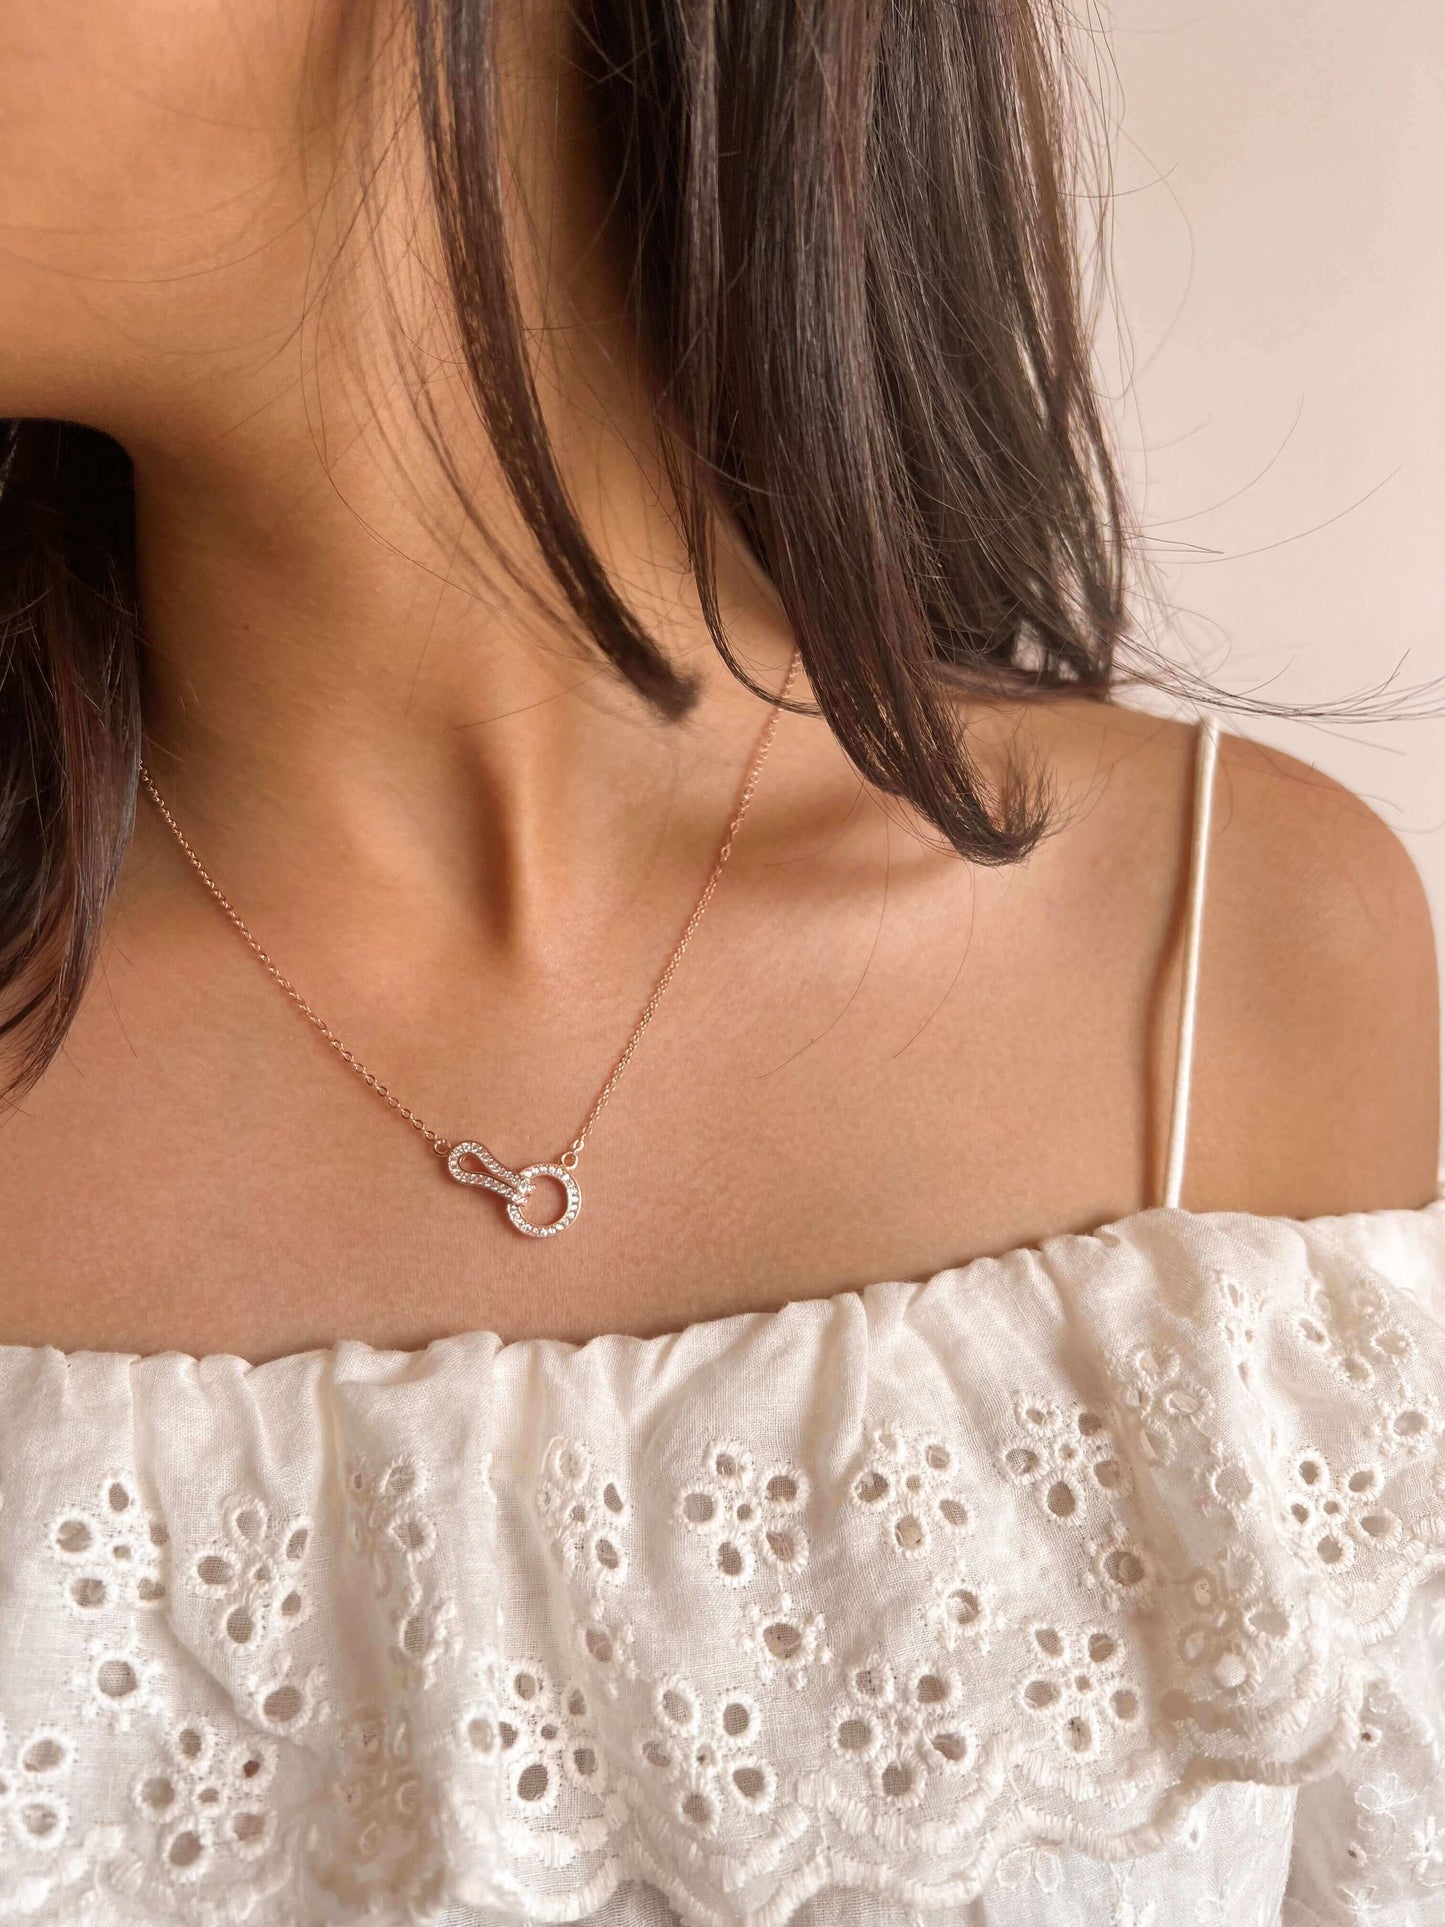 Eternity neck chain in rose gold plated silver